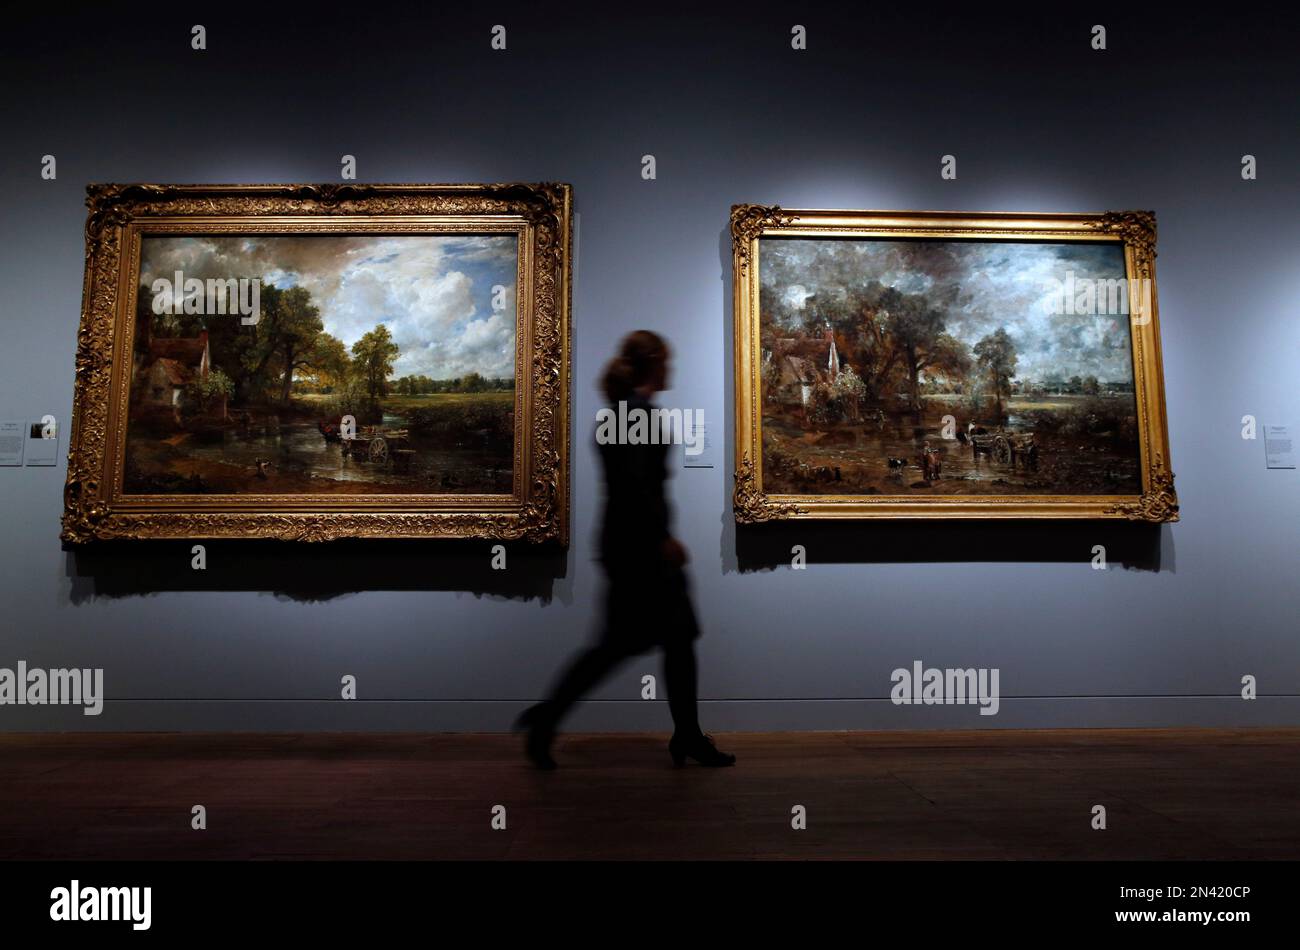 A Victoria and Albert Museum press officer walks past John Constable's The Hay Wain, left, towards the full oil sketch of the same scene at an exhibition entitled: 'Constable: The Making of a Master ' with works by British landscape painter John Constable, during a preview in London, Wednesday, Sept. 17, 2014. Best-known to many for ‘The Hay Wain’ - an artwork which adorns countless decorative plates and trays, the exhibition explores Constable’s influences and takes a look at the creative process behind some of his most famous works. The exhibition will run from Sept. 20, 2014 to Jan. 11. 201 Stockfoto